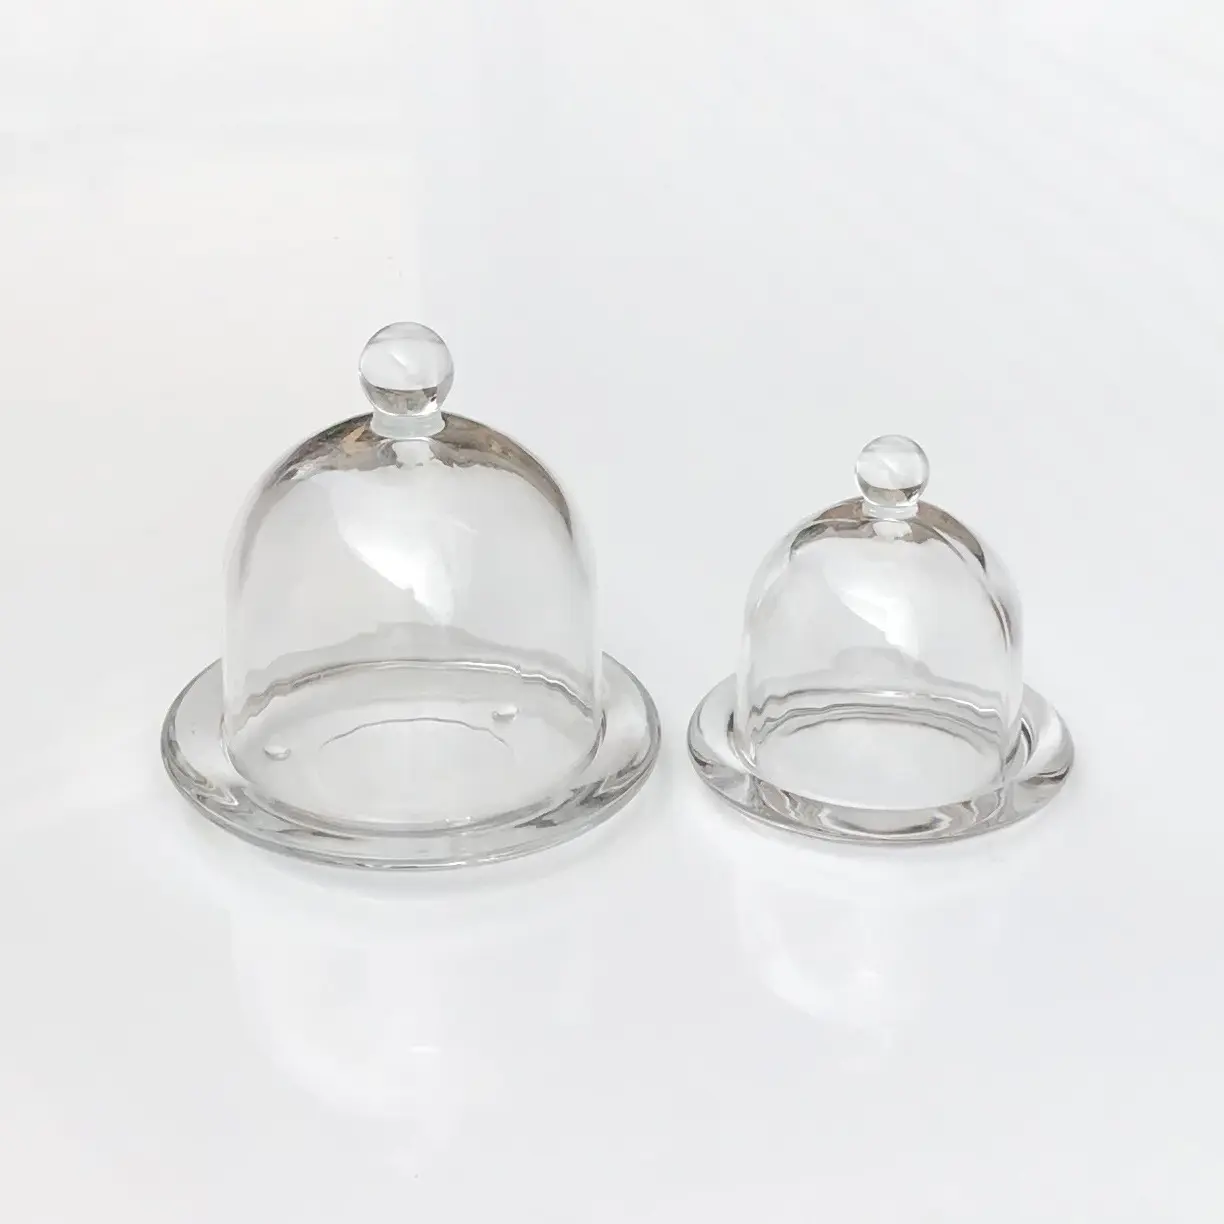 Handblown clear glass home decor glass bell jar dome for sale